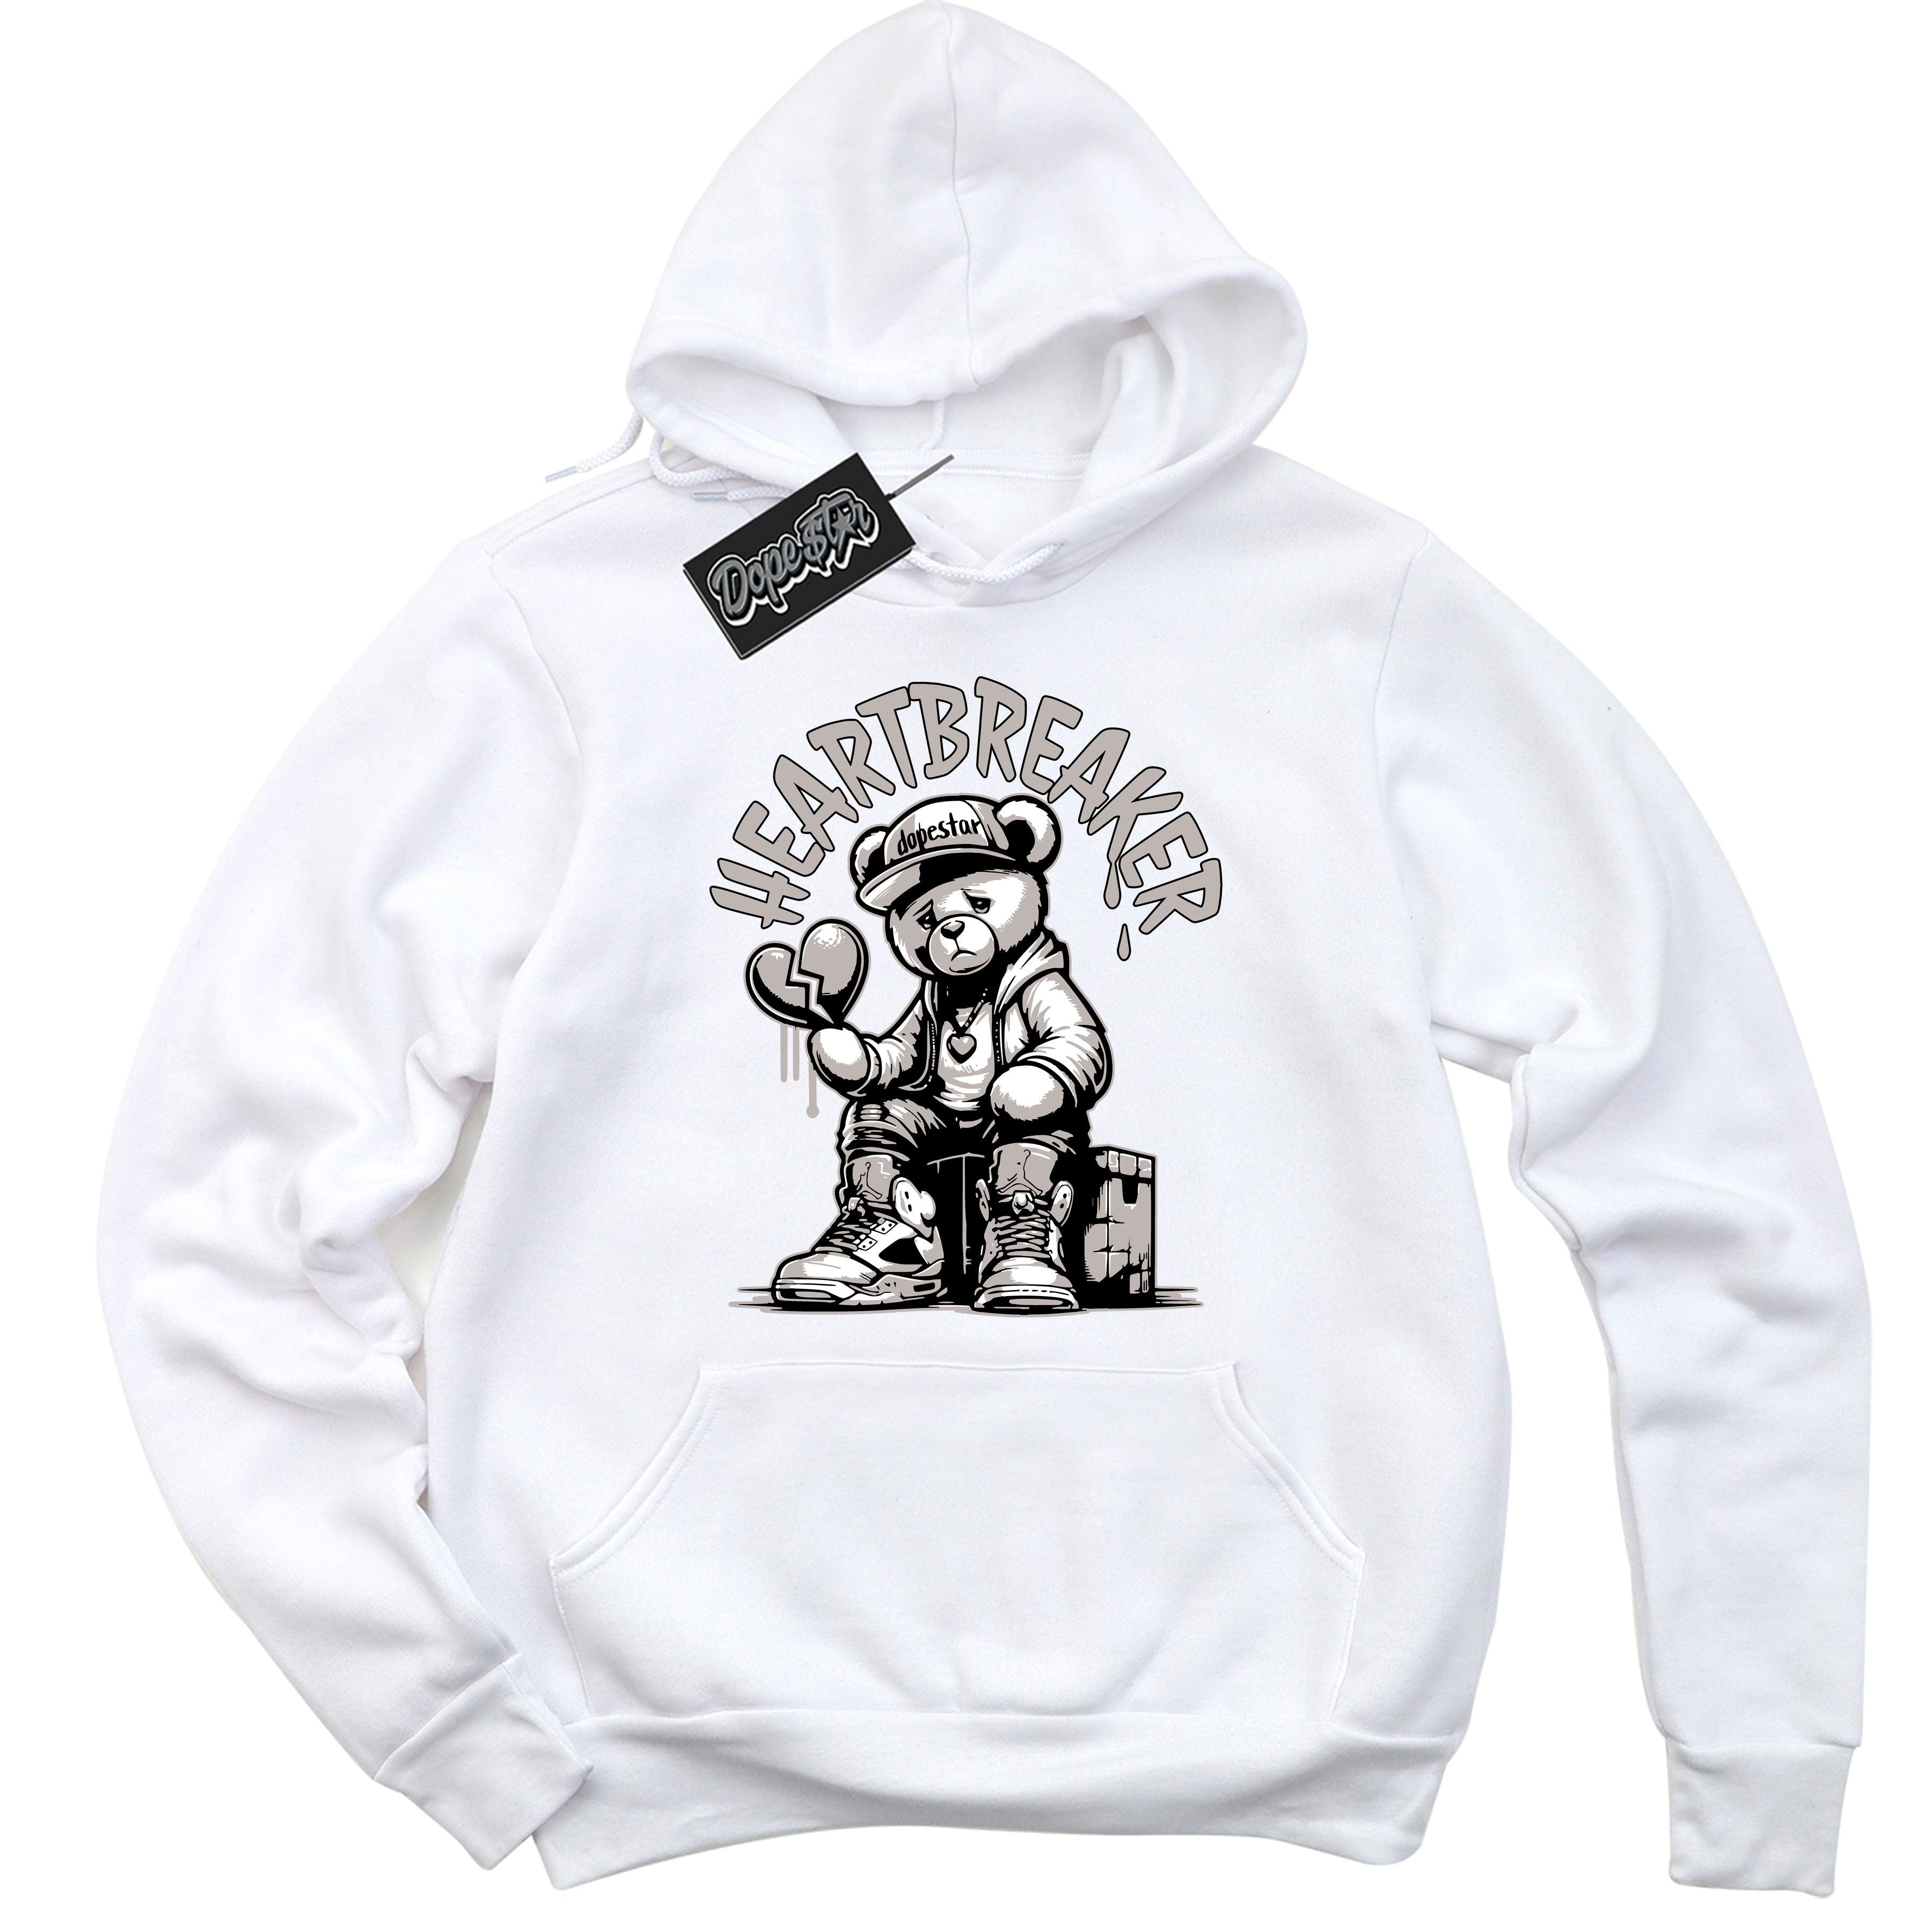 Cool White Hoodie With Heartbreaker Bear design That Perfectly Matches AIR JORDAN 4 RETRO MILITARY BLACK Sneakers.